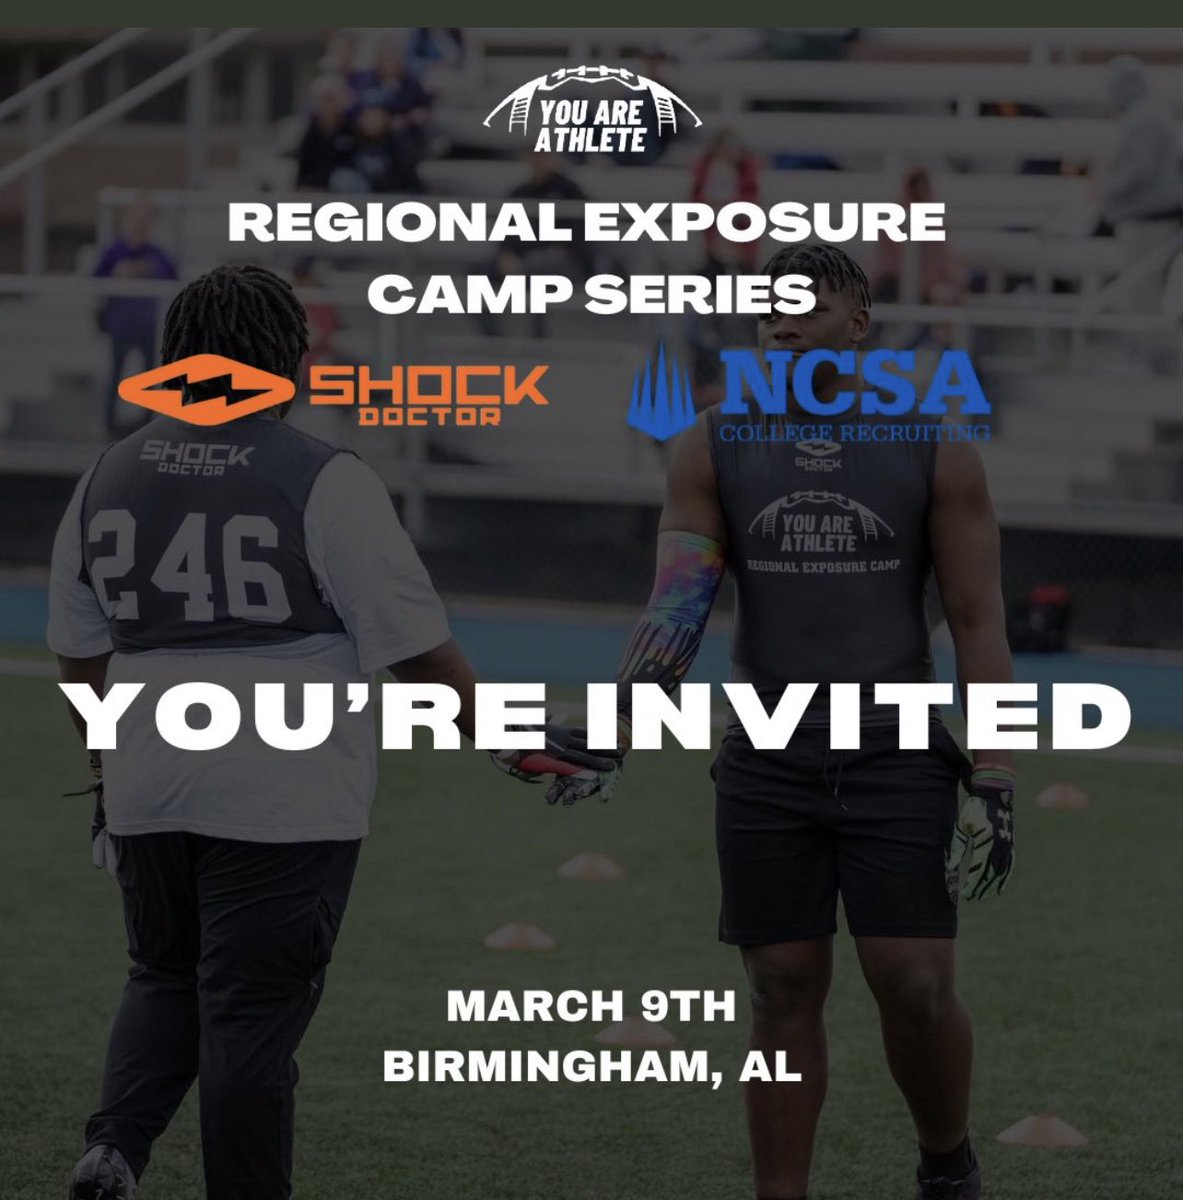 Blessed to receive this invitation to compete with other talented athletes@youareathlete@ shock doctor